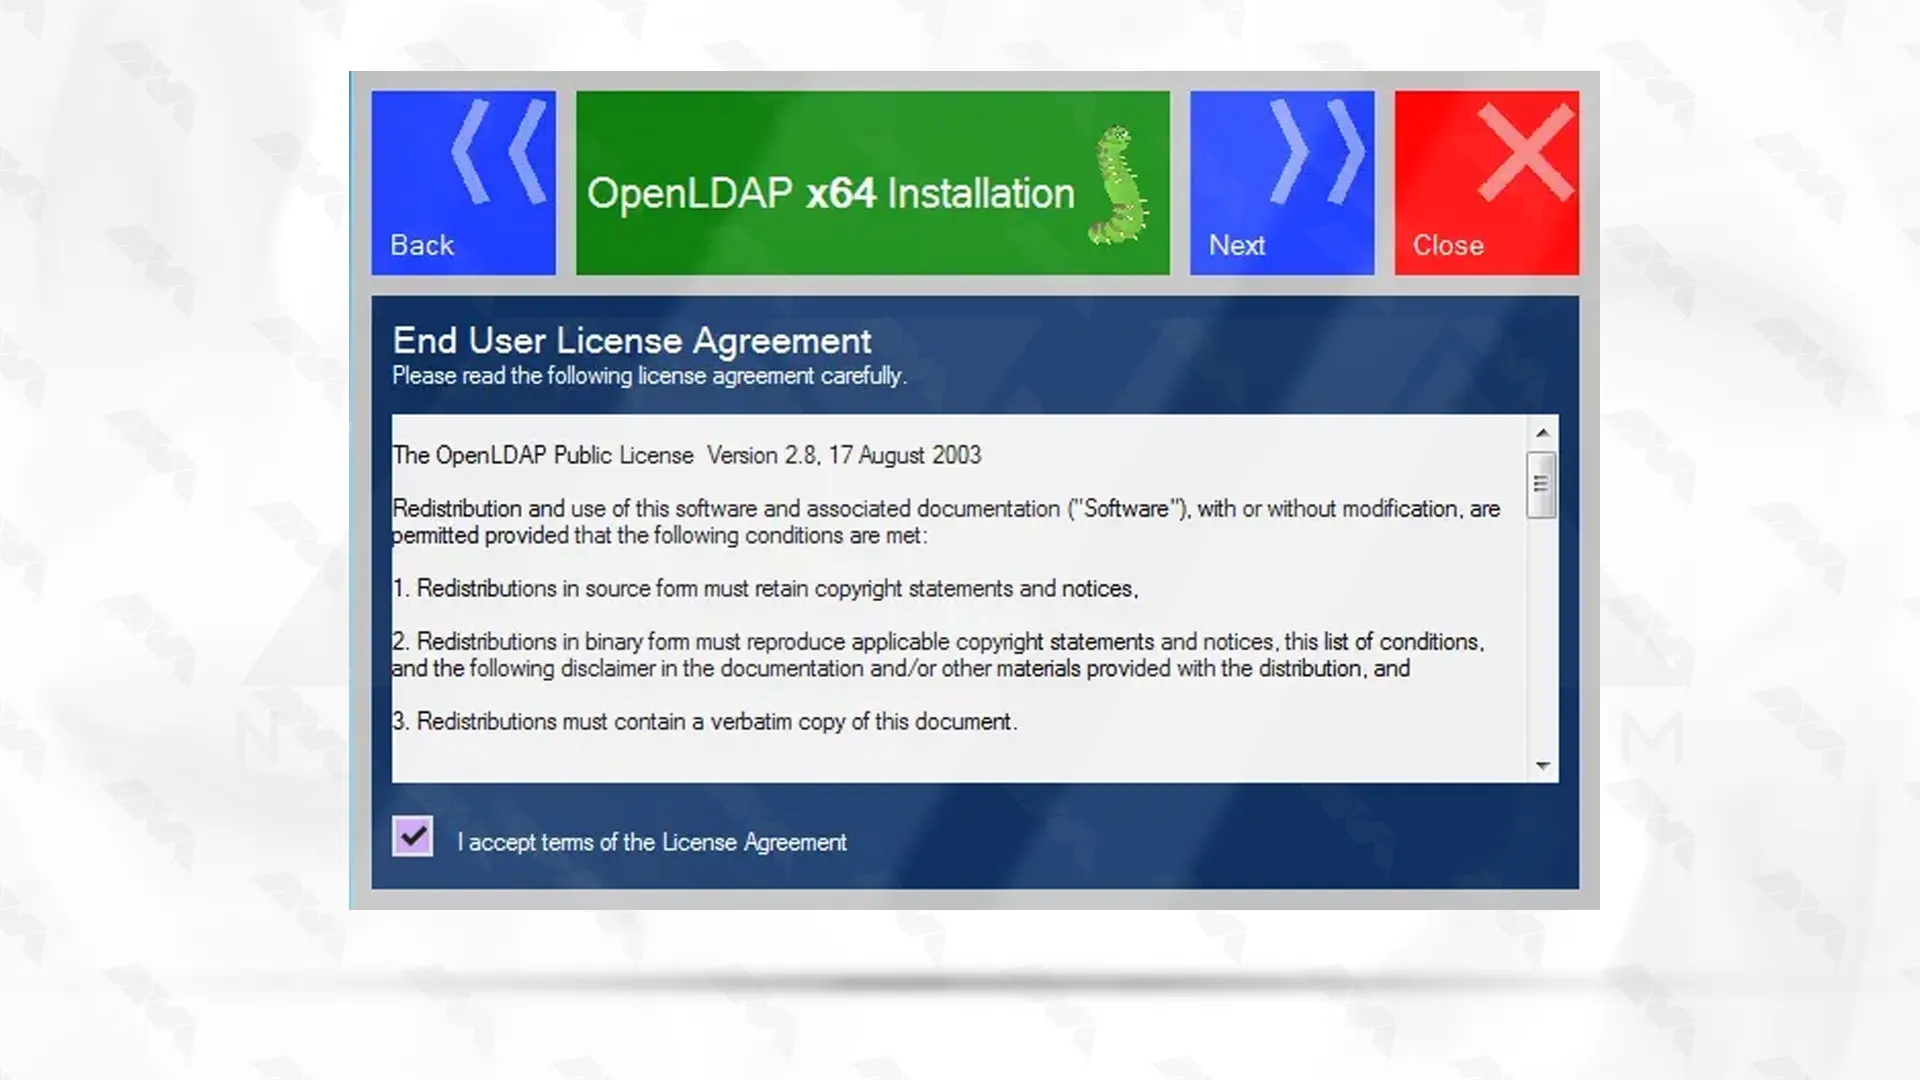 setup-wizard-to-install-OpenLDAP-on-win